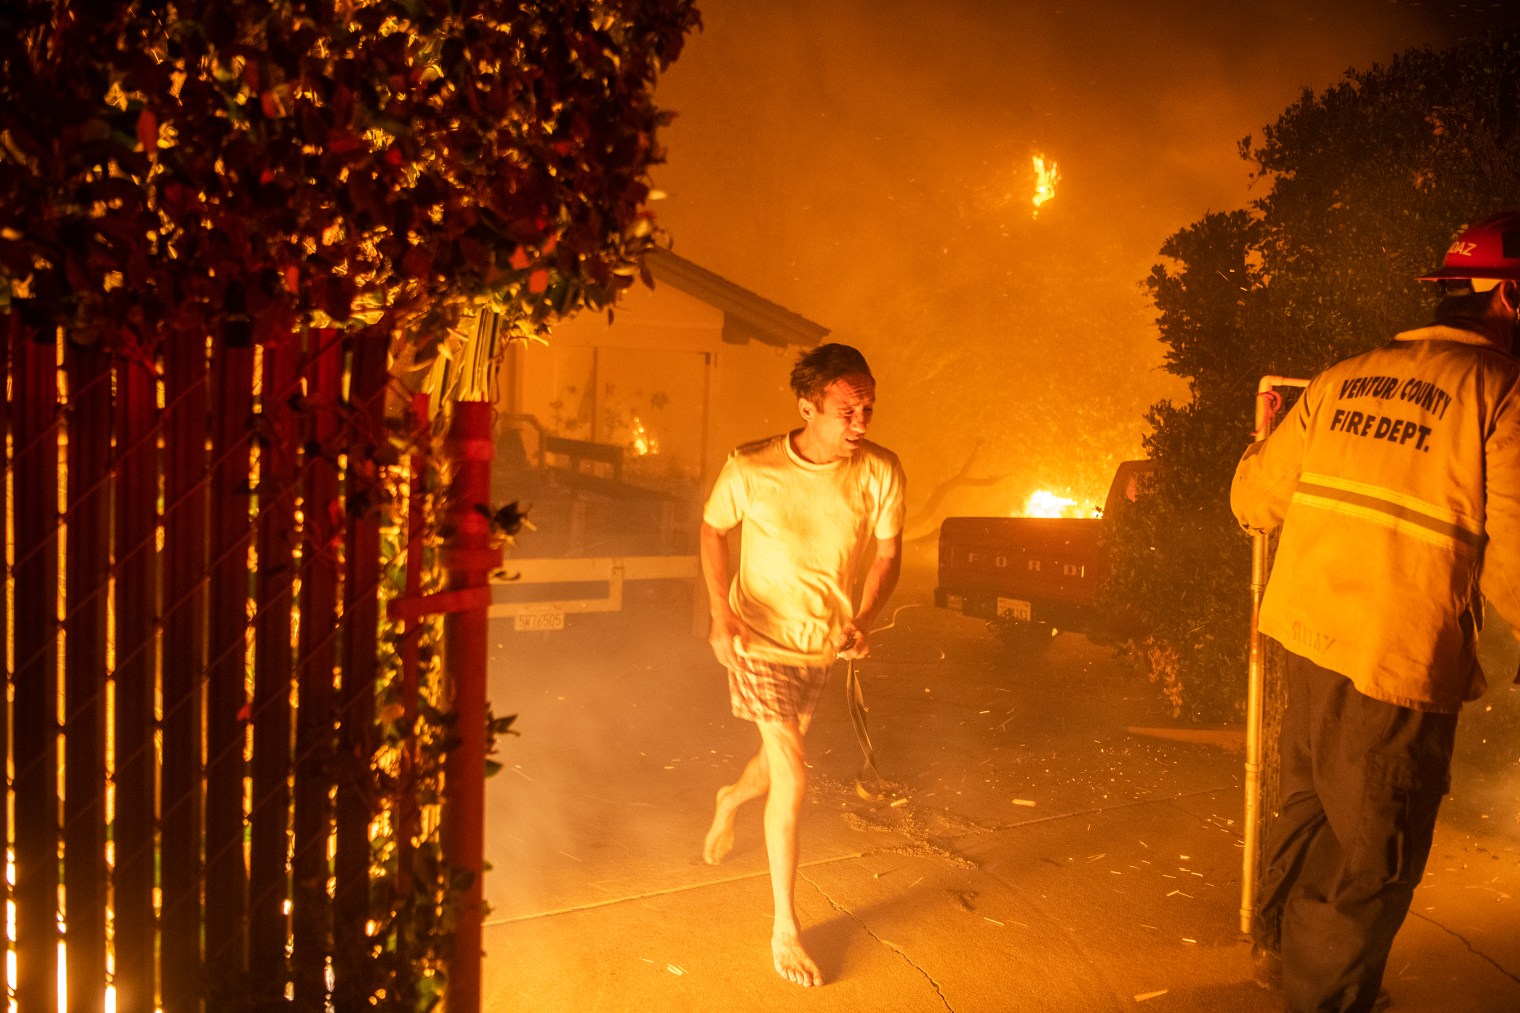 A resident flees his home in Thousand Oaks, Calif. during a wildfire